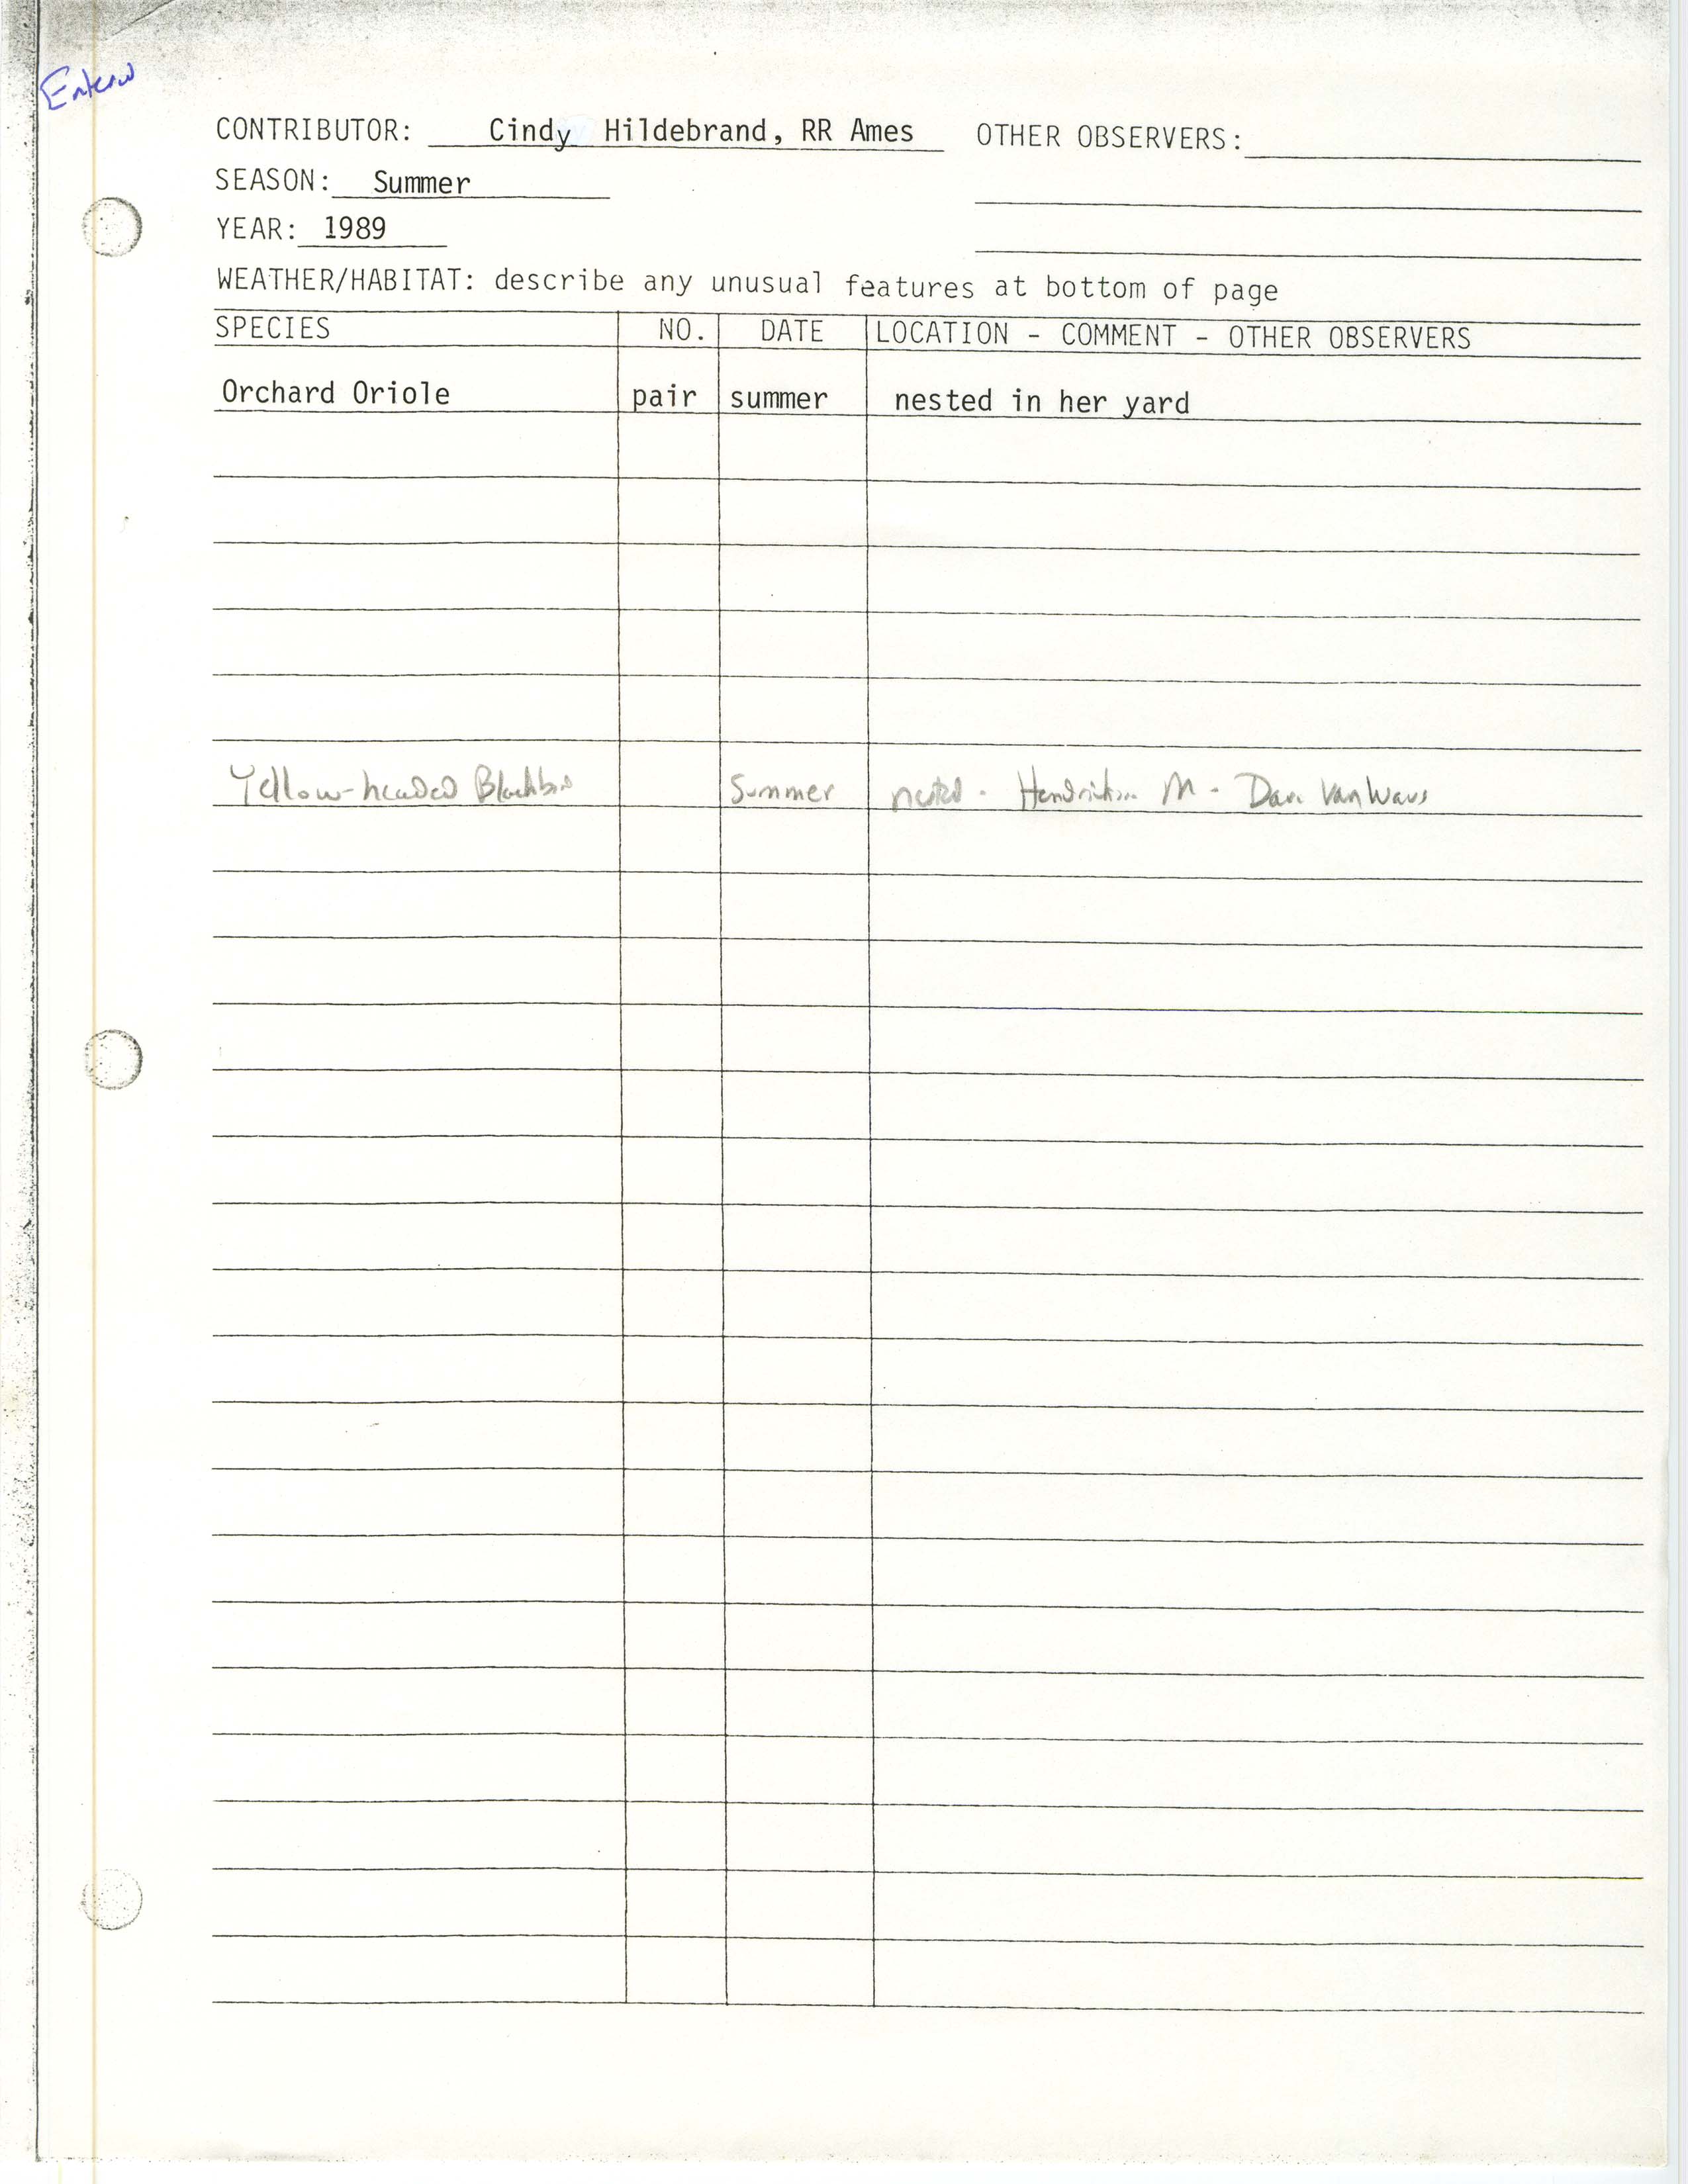 Field notes contributed by Cindy Hildebrand and Dave VanWaus, summer 1989